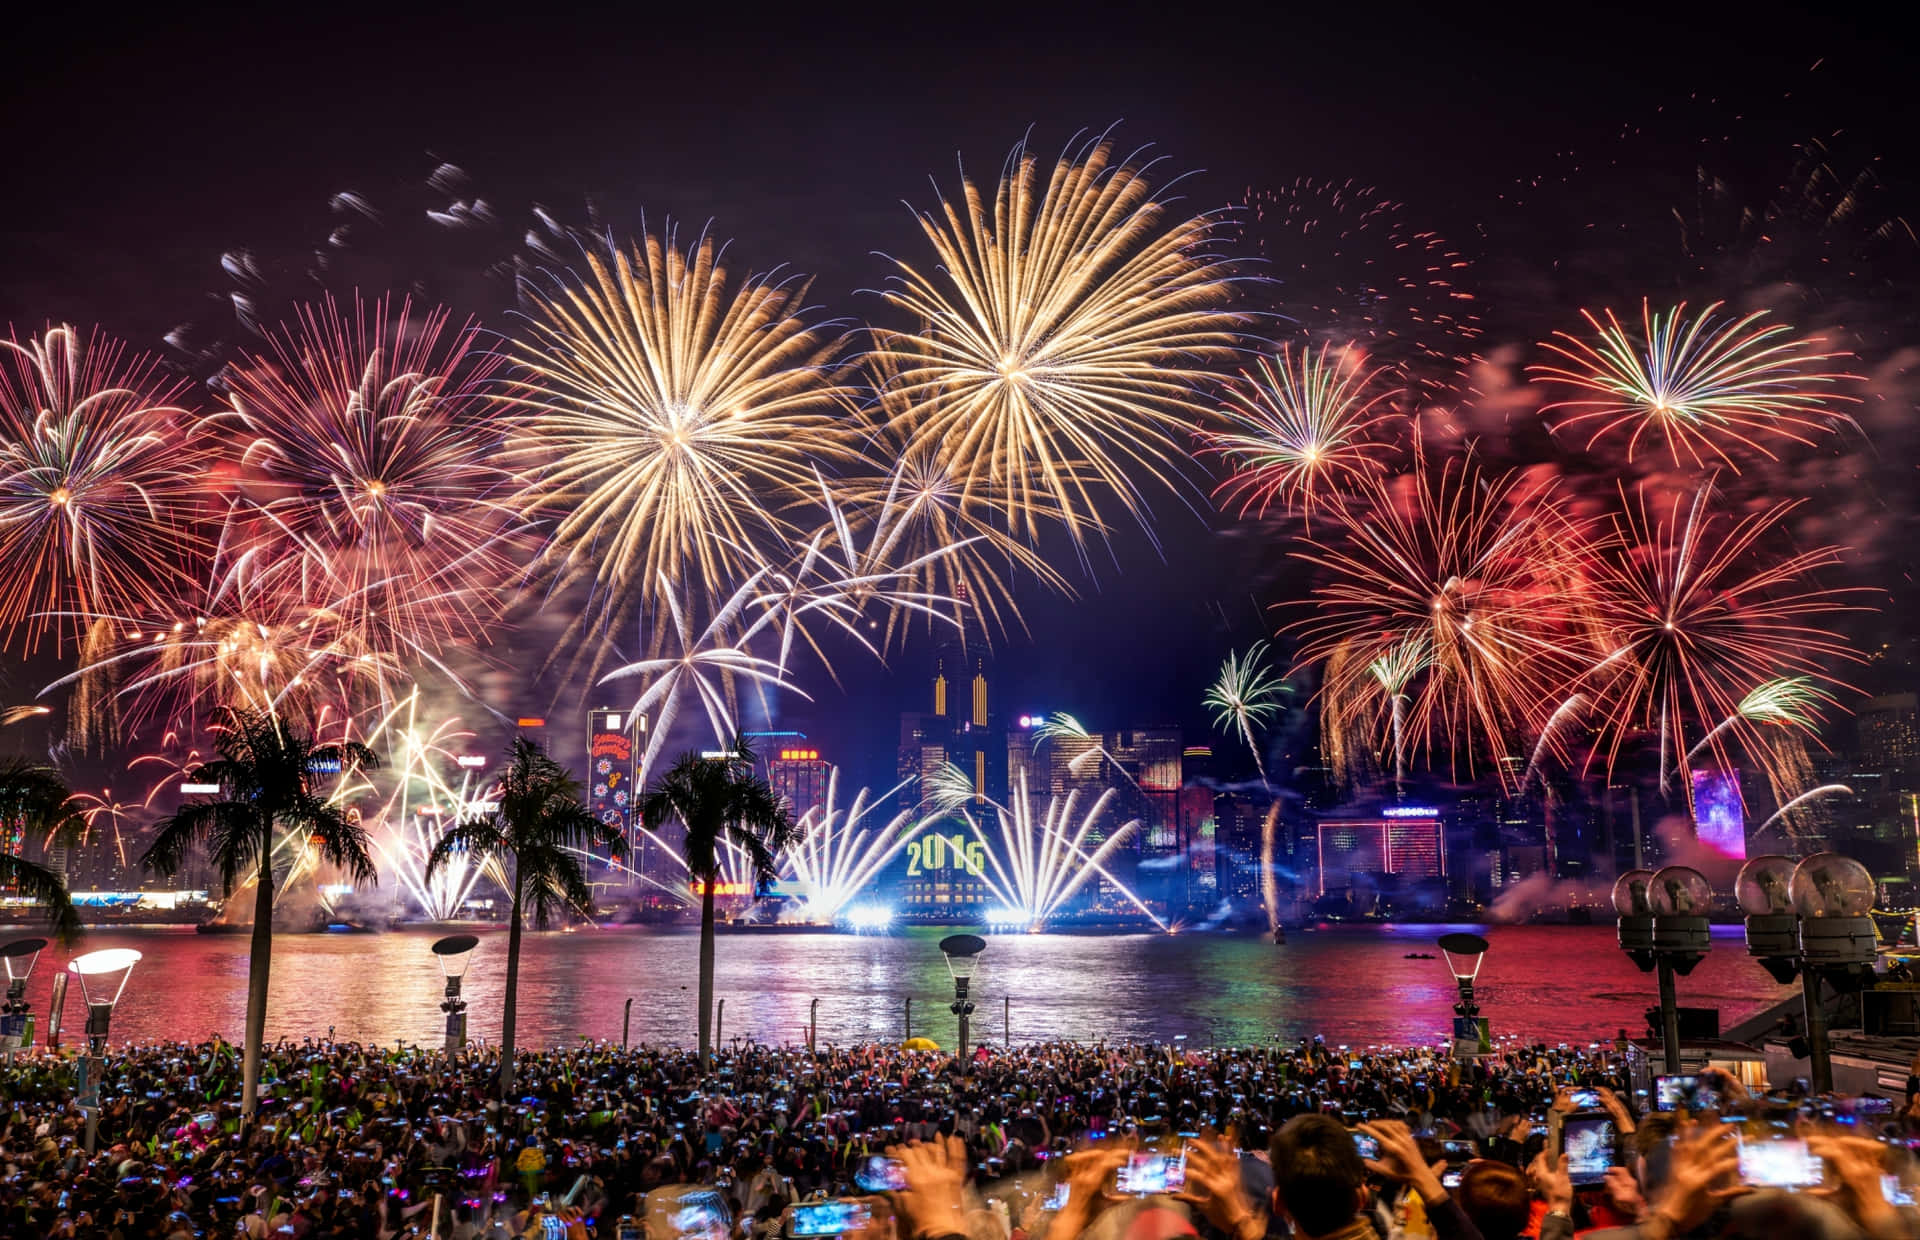 Welcoming the New Year: An Enthralling Fireworks Display at Midnight